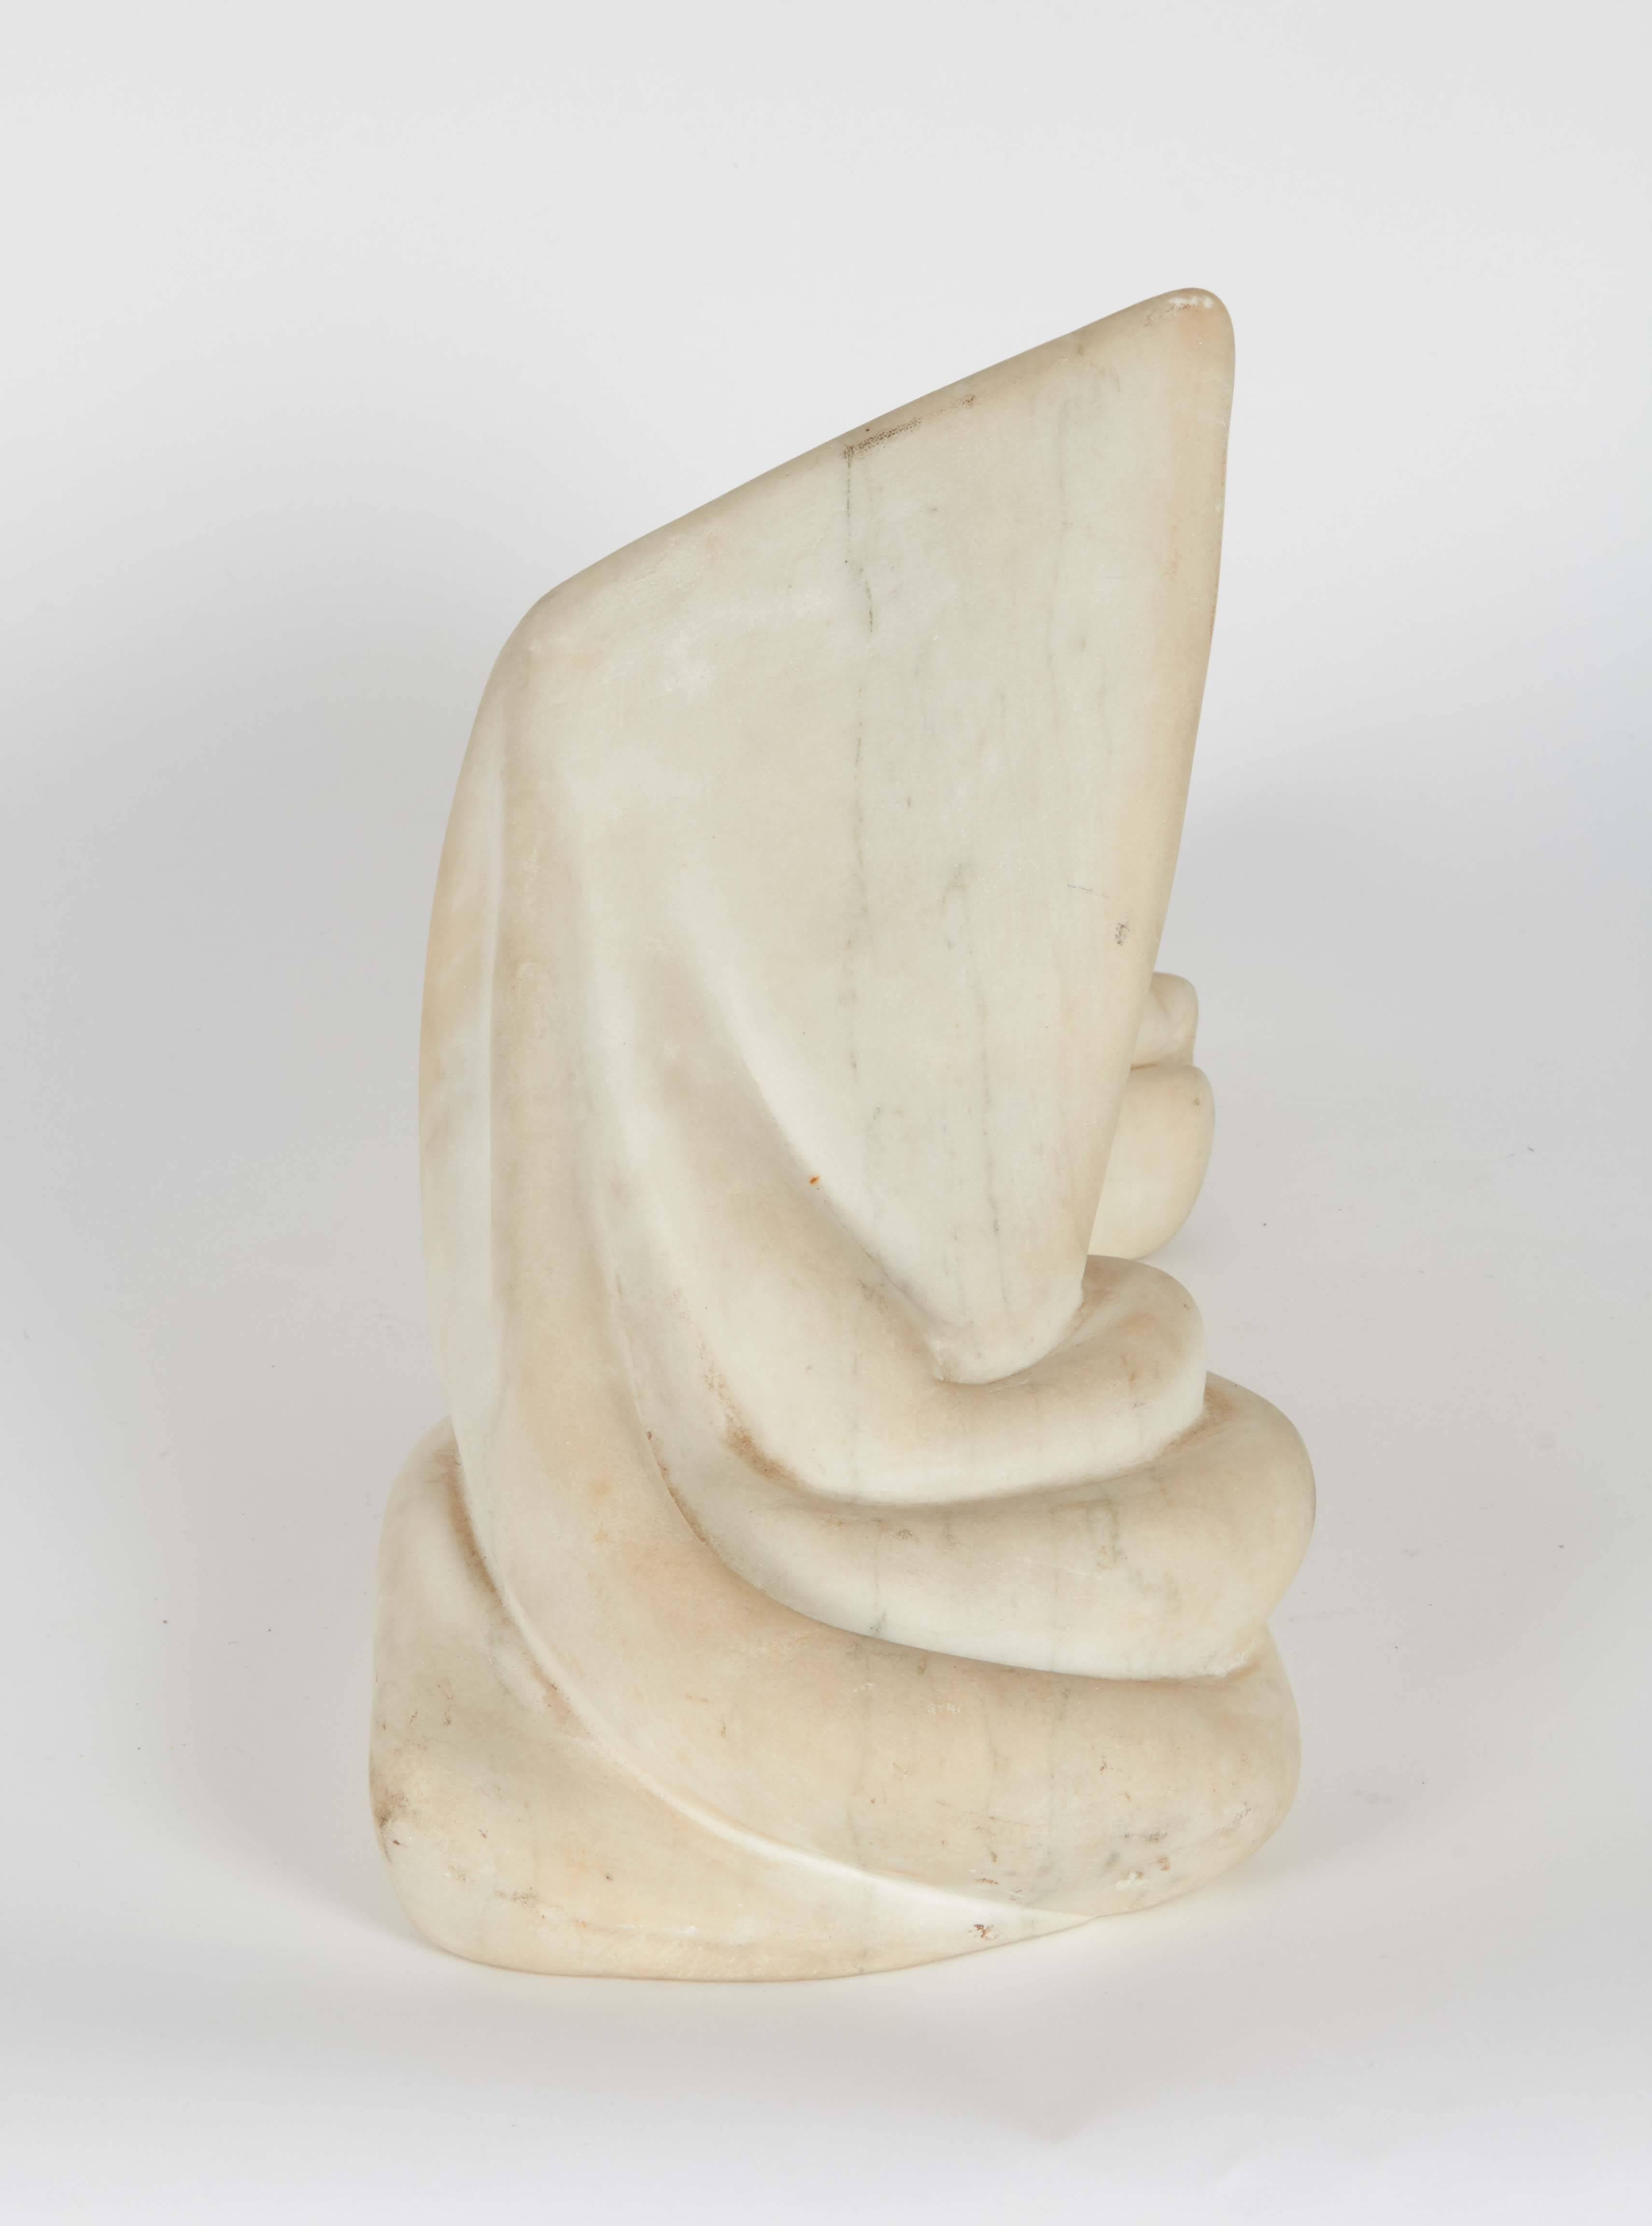 20th Century Draped Abstract Sculpture in White Marble, Signed M. Marlow